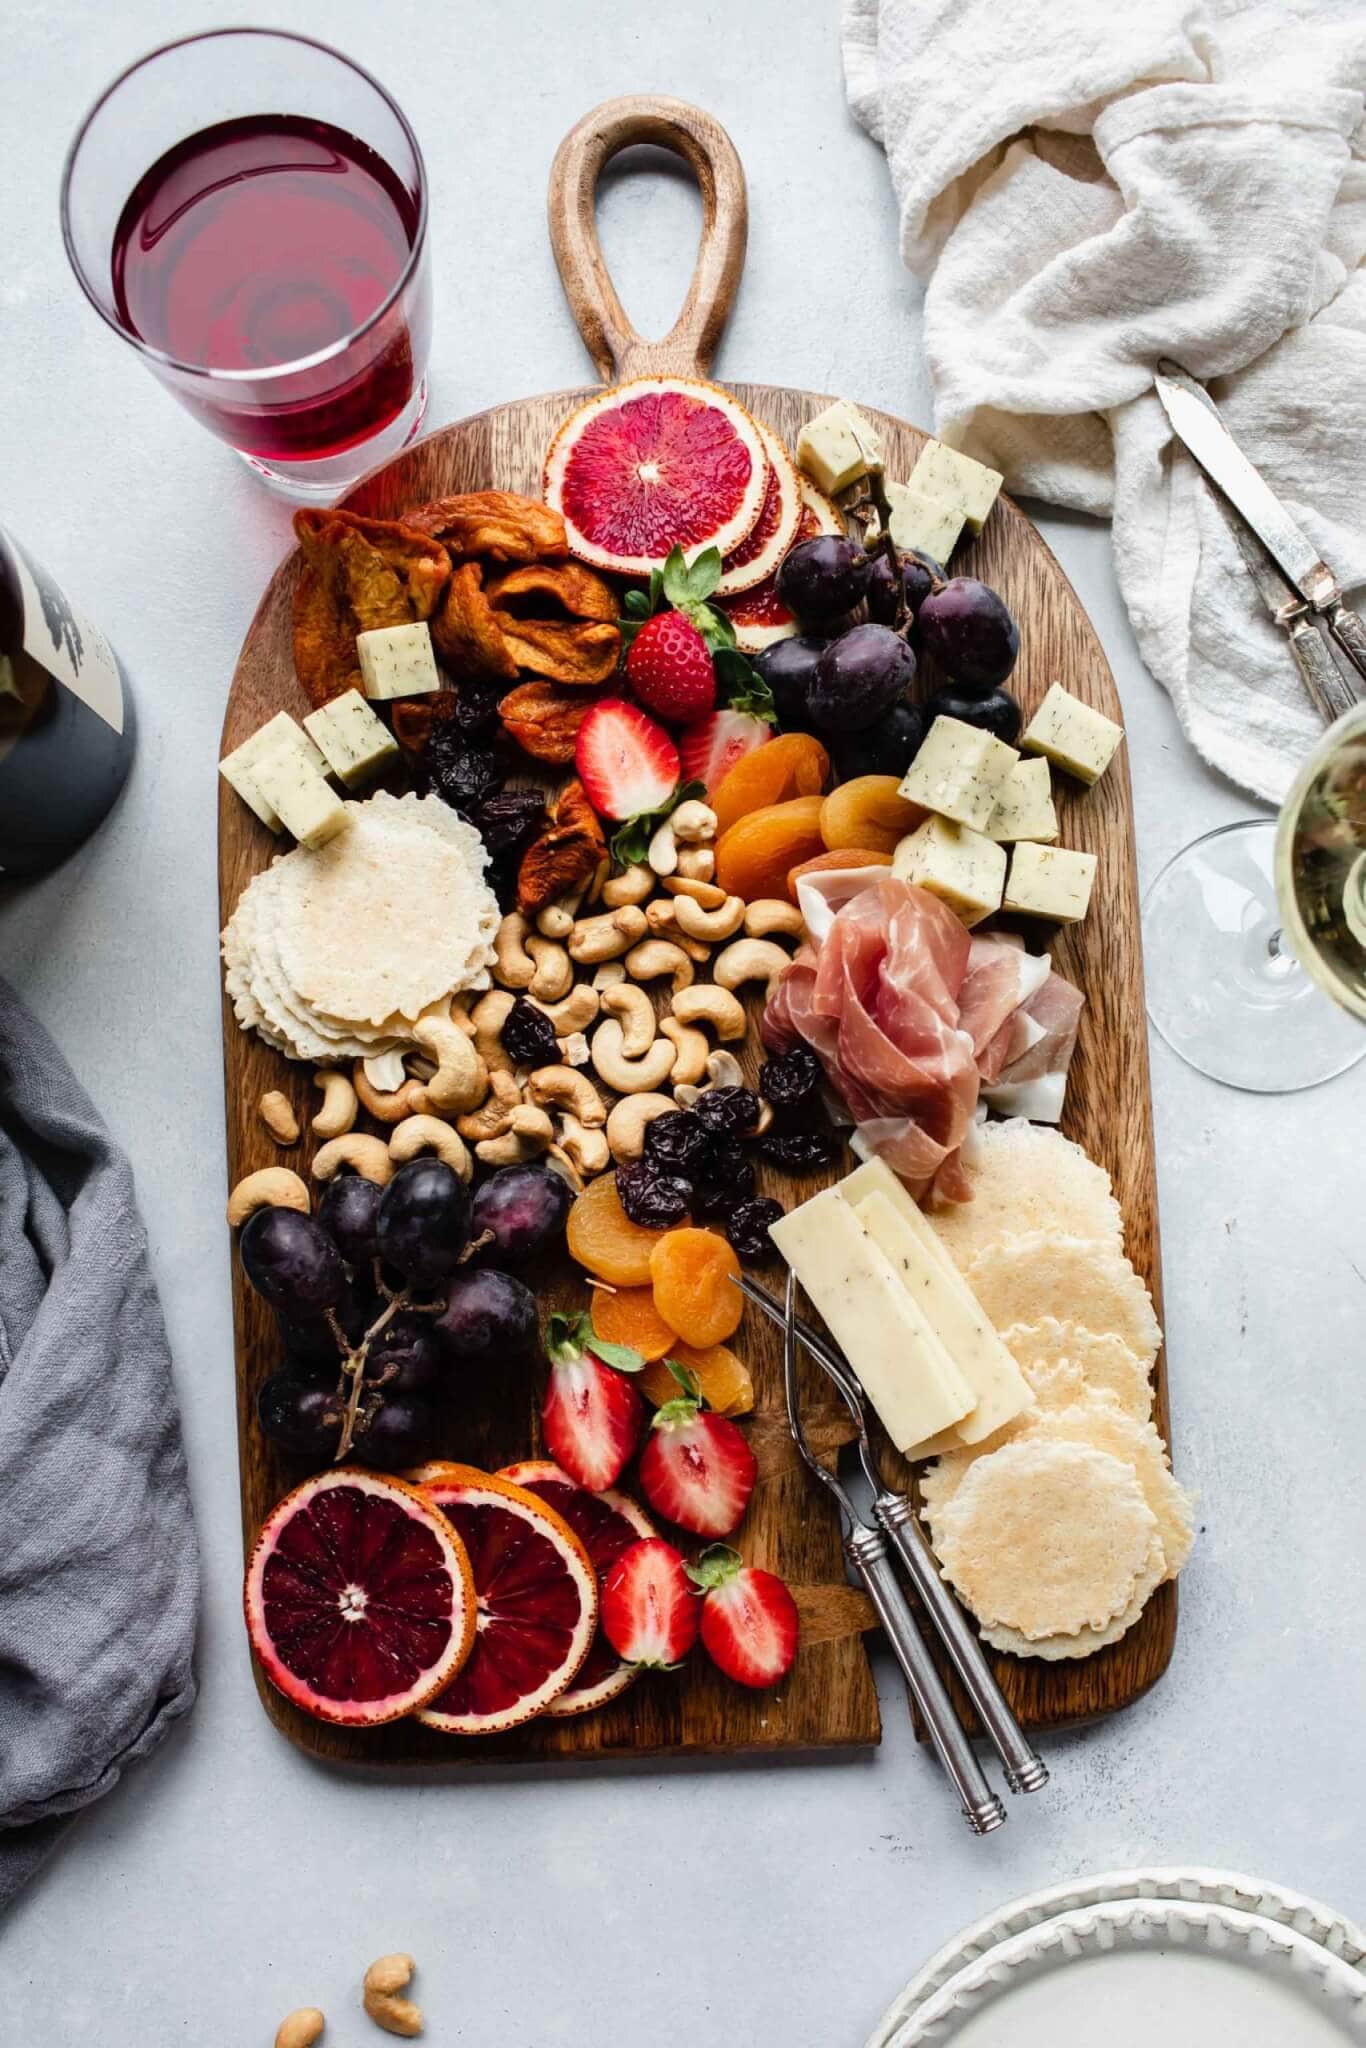 Cheeses, crackers and fruits and nuts on wood serving tray next to glass of wine.